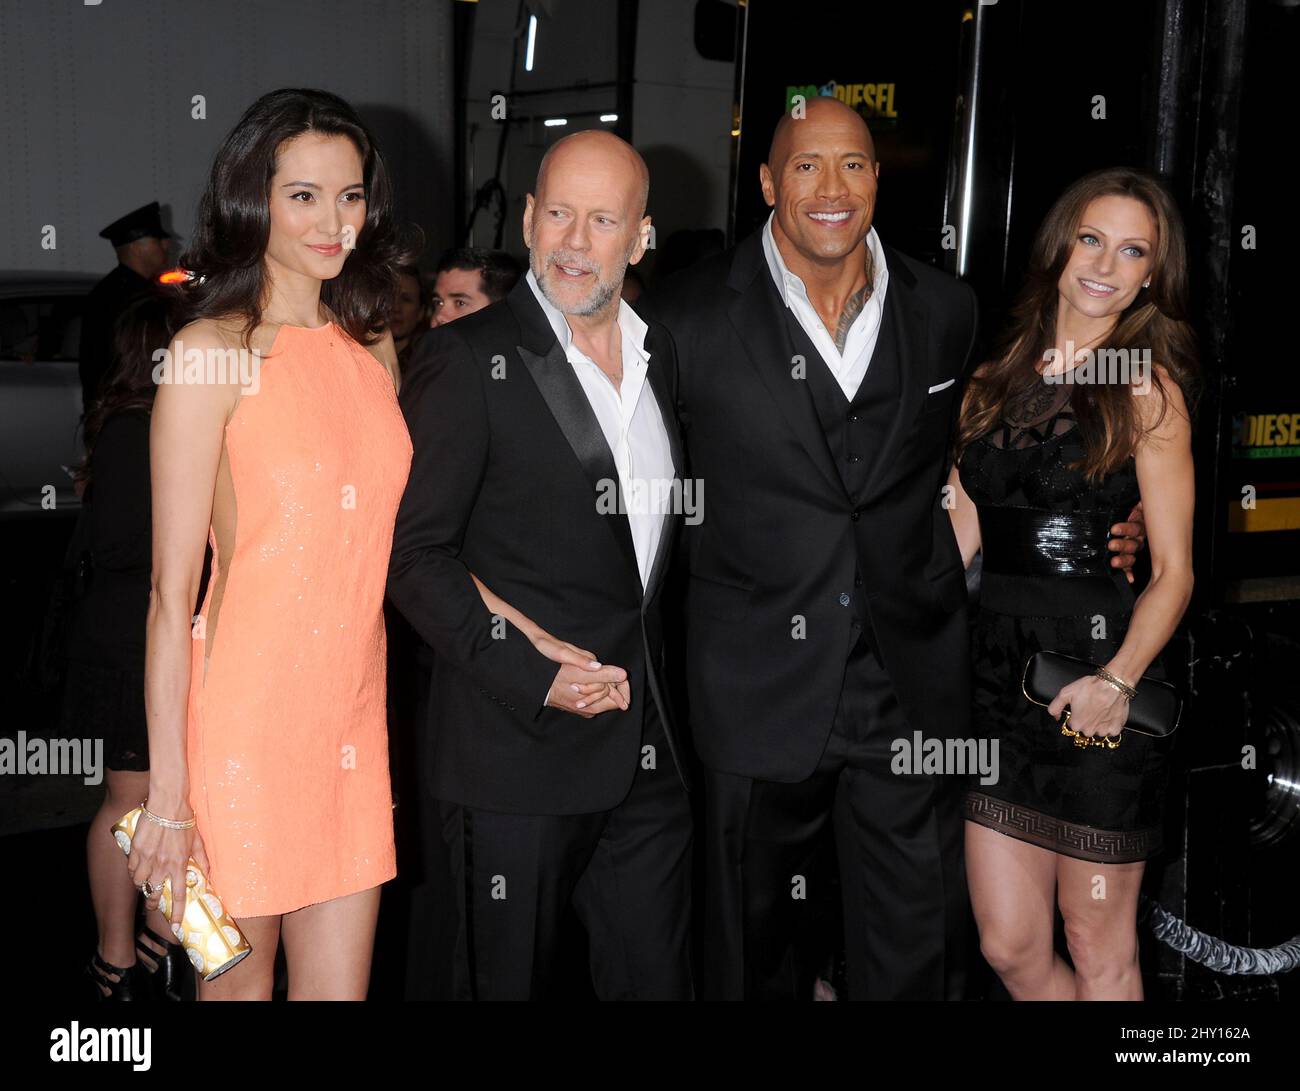 Emma Heming, Bruce Willis, Dwayne Johnson, Lauren Hashian during the premiere of the new movie from Paramount Pictures G.I. JOE: RETALIATION, held at Grauman's Chinese Theatre, on March 28, 2013, in Los Angeles. Stock Photo